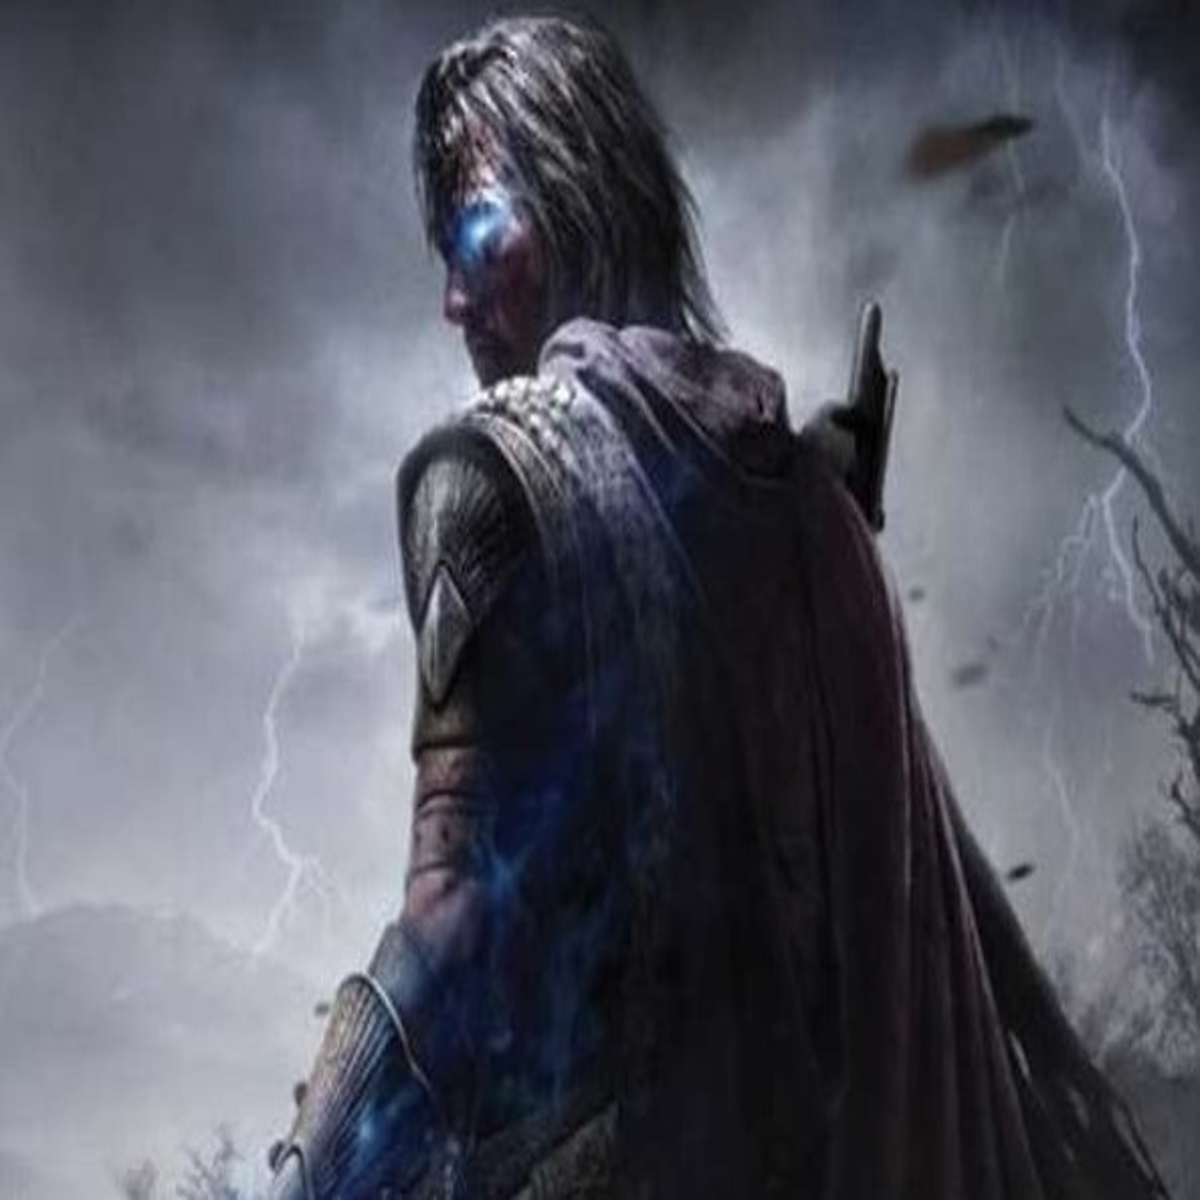 Servers turned off for Middle-earth: Shadow of Mordor - Polygon